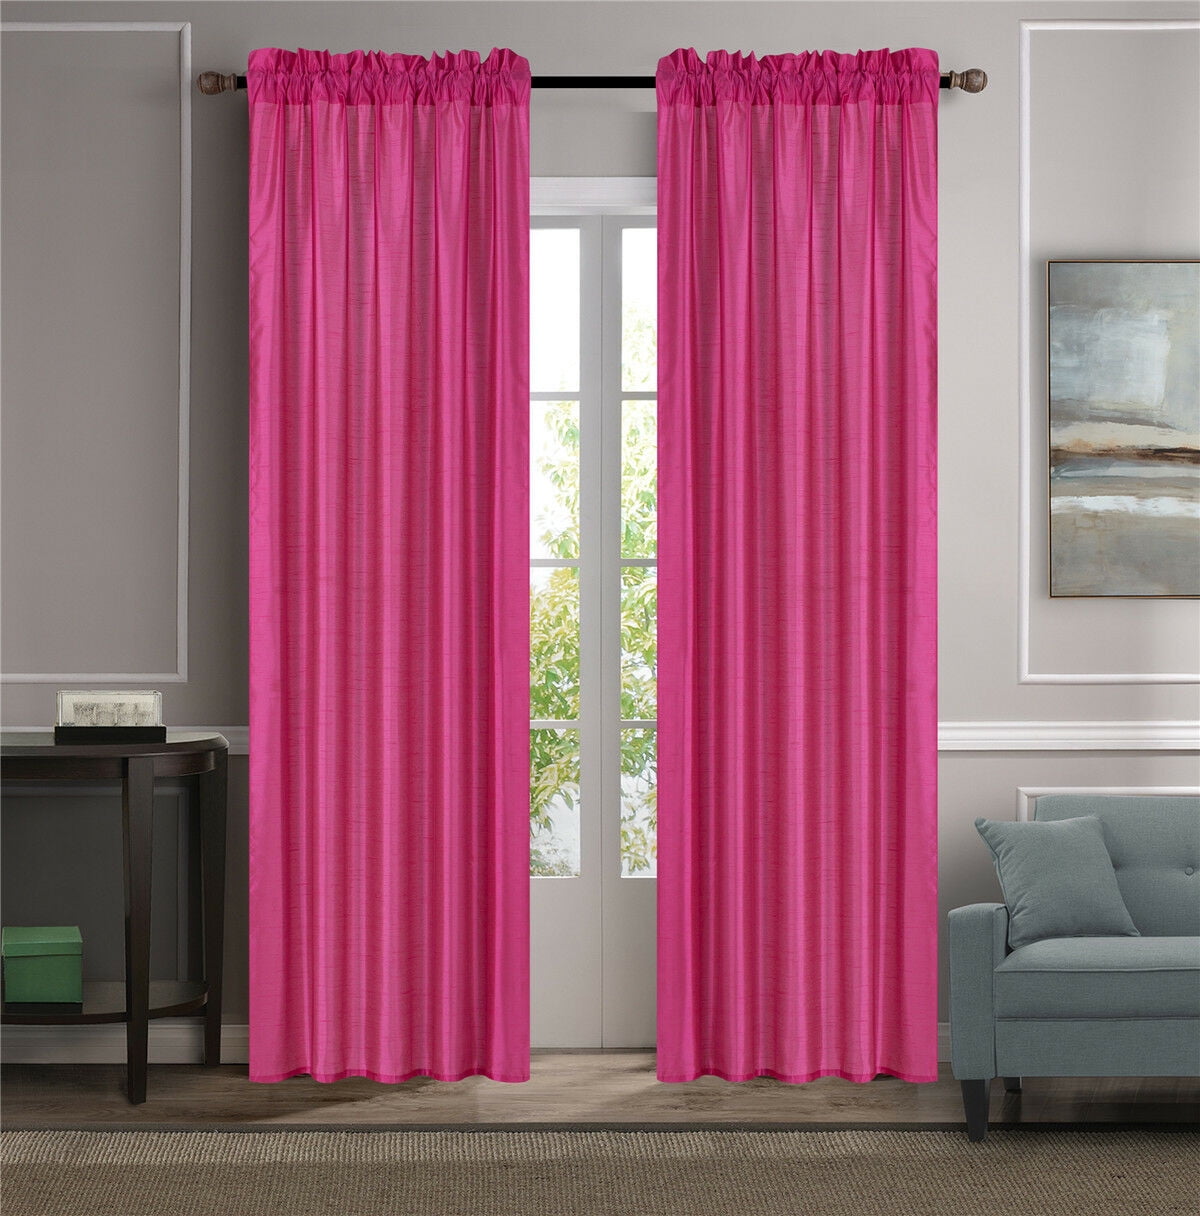 1pc sheer panel/voile/curtain PINK CHEETAH PRINT w/ rod pocket 84'' lenght 